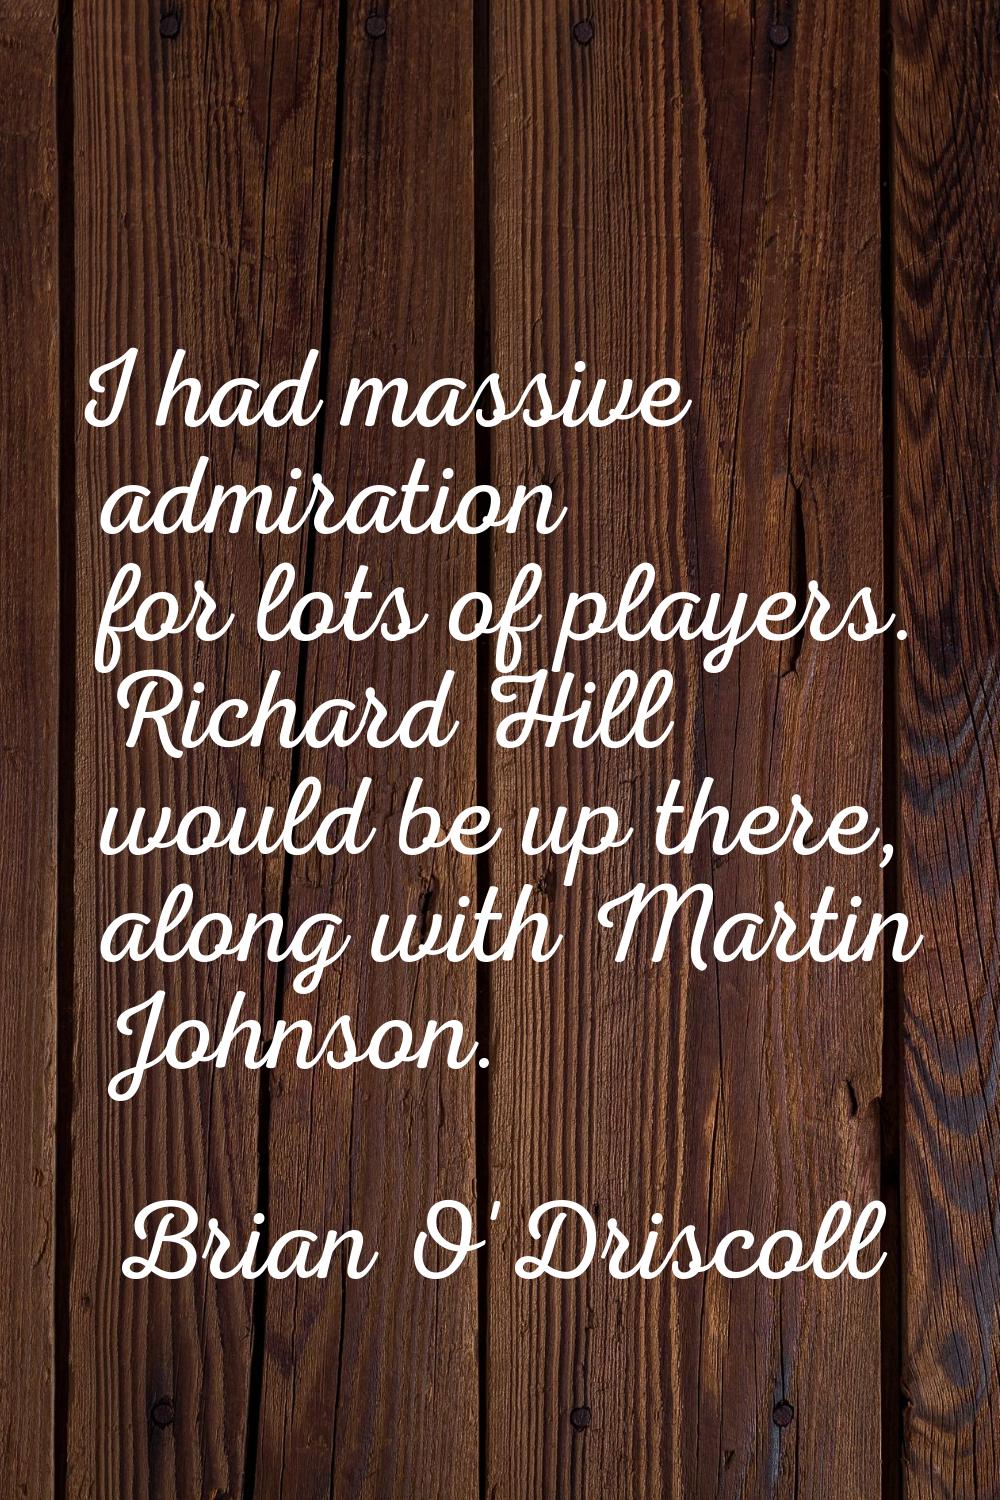 I had massive admiration for lots of players. Richard Hill would be up there, along with Martin Joh